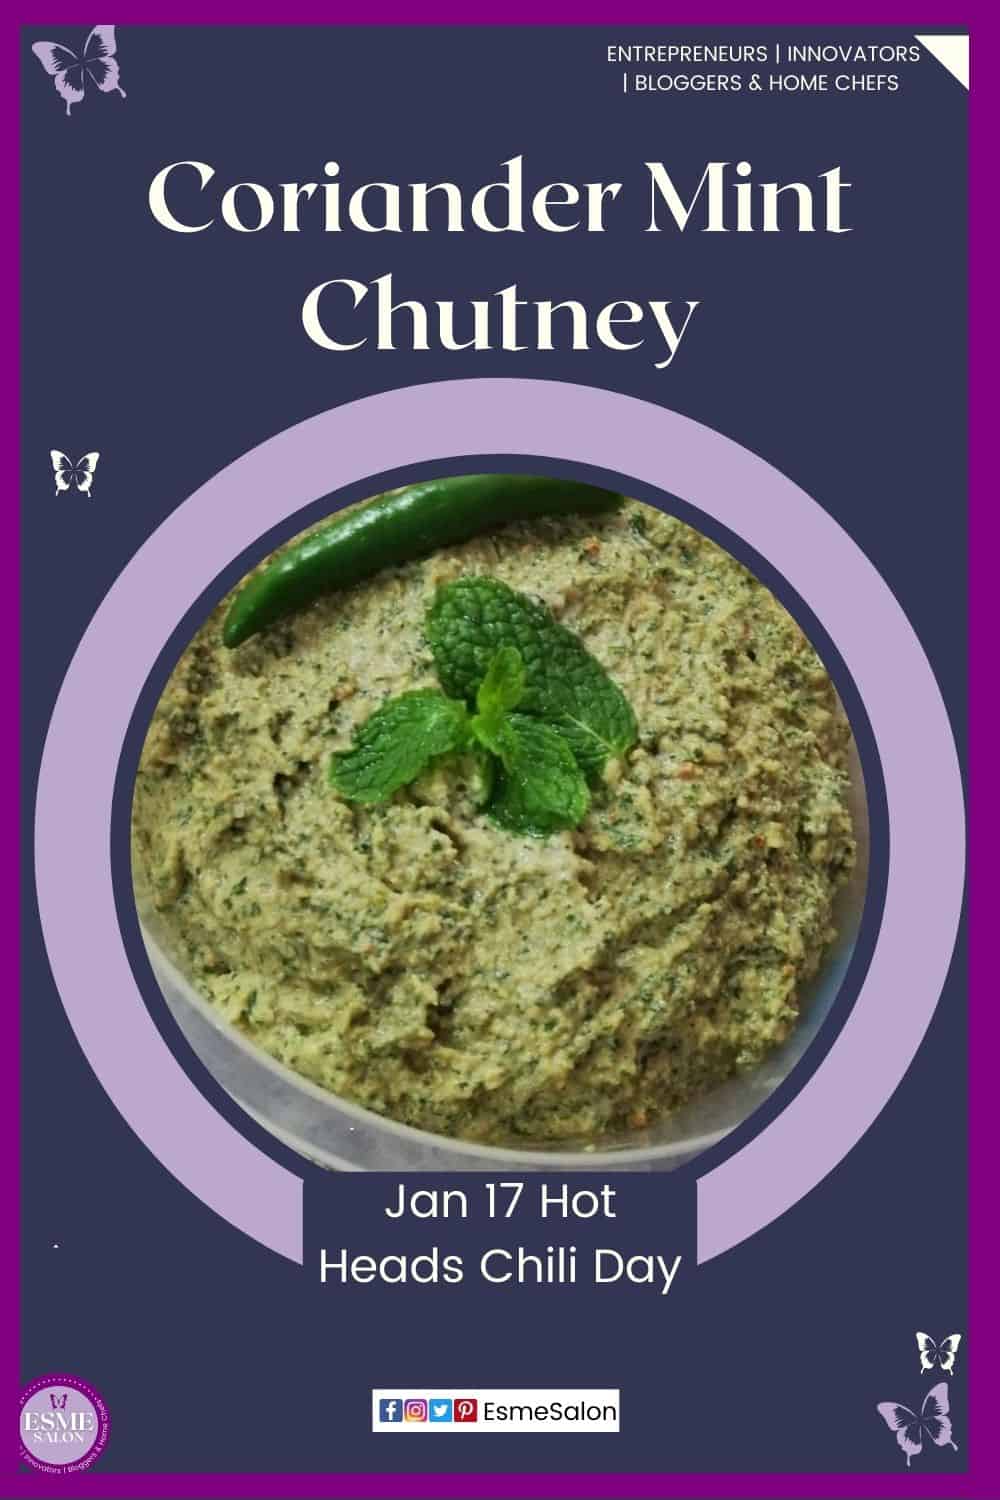 an image of a plastic container filled with Coriander Mint Chutney with a green chili on top